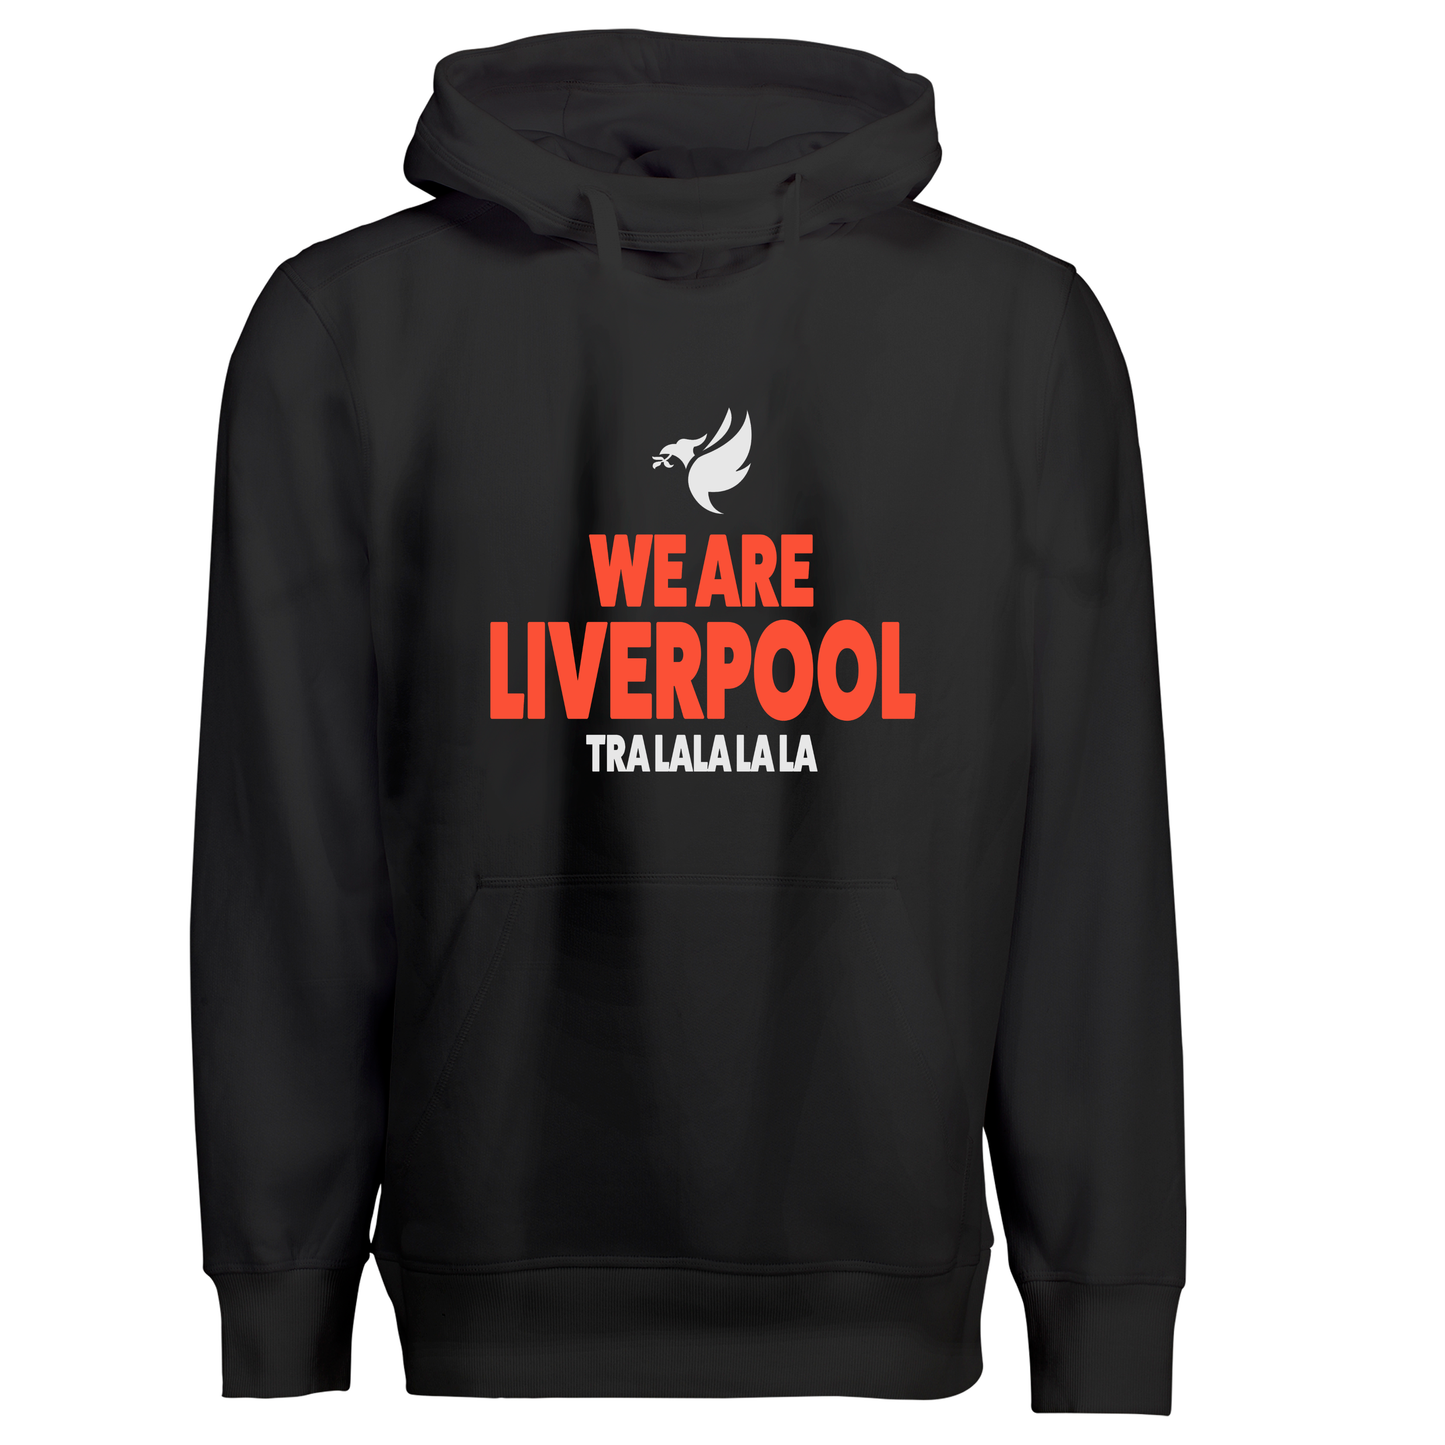 We are liverpool - Hoodie